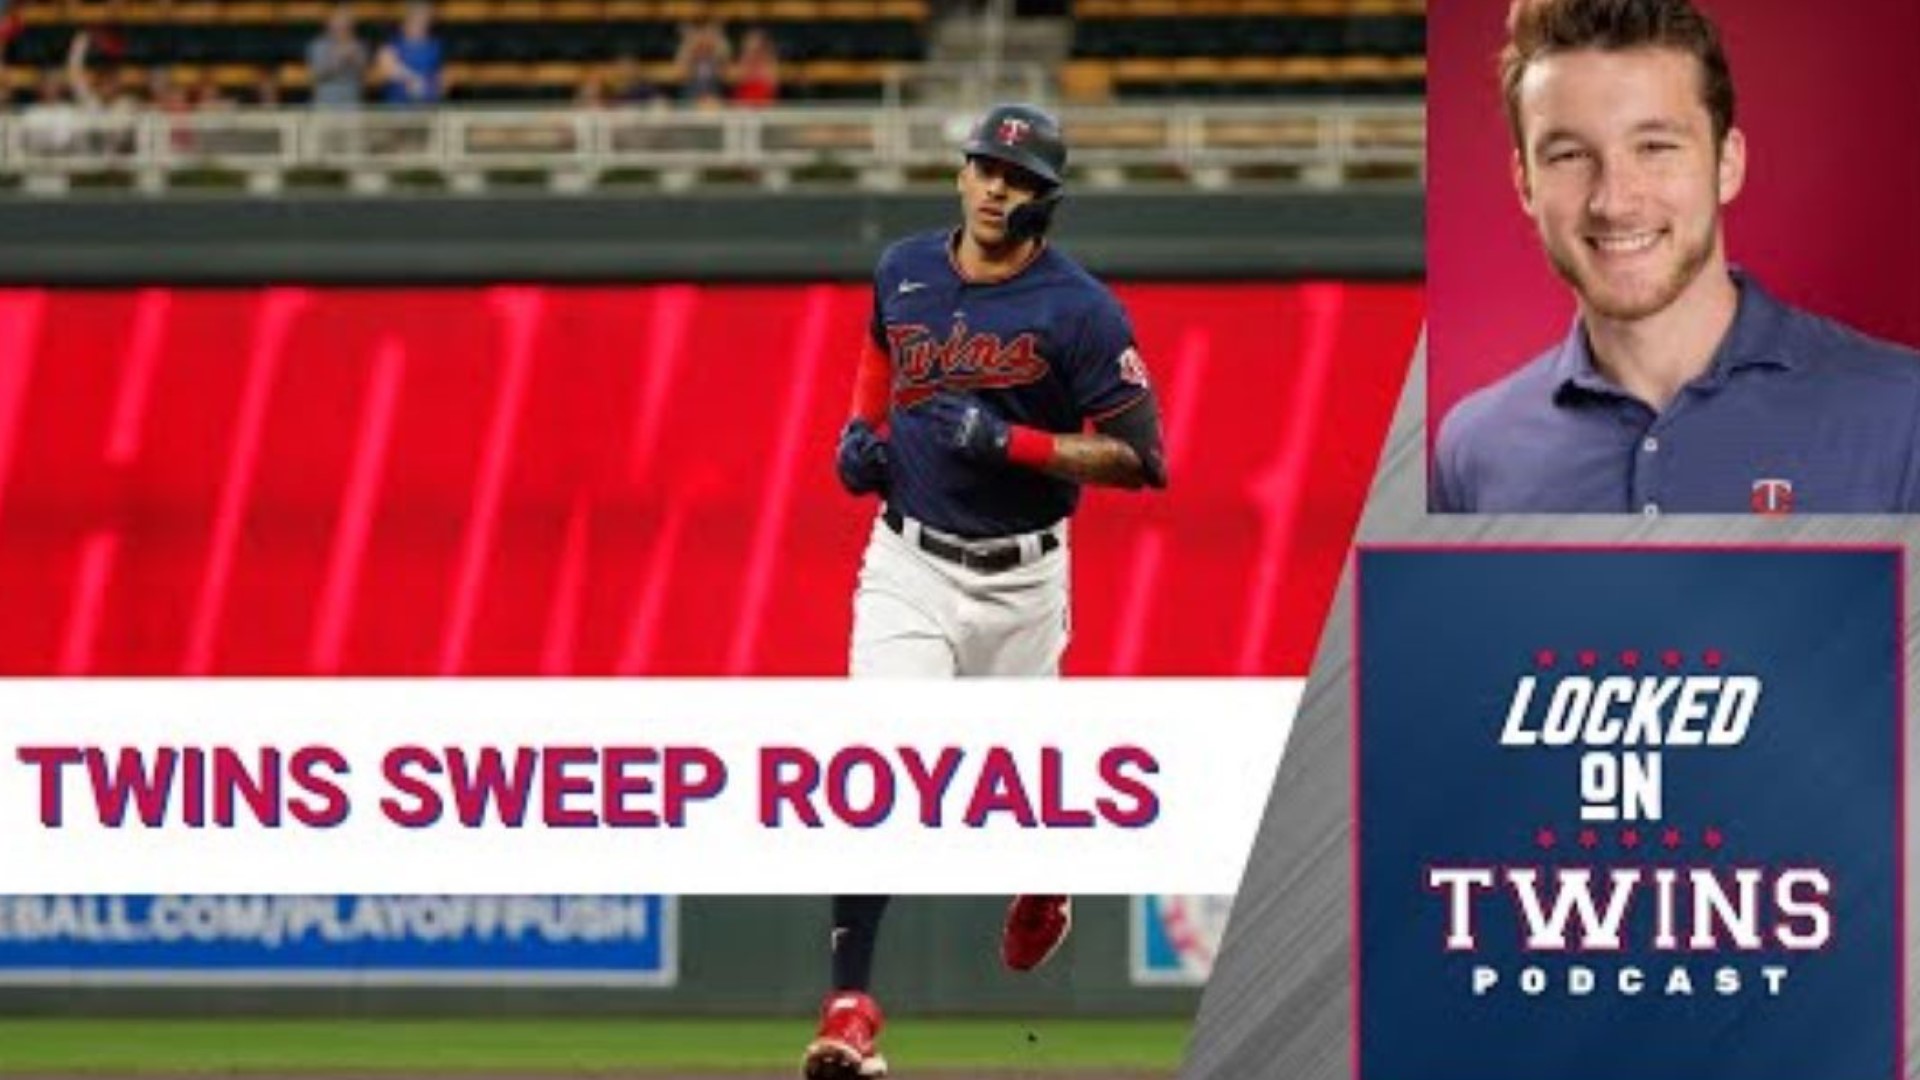 The Minnesota Twins completed a three-game sweep with a 3-2 win over the Kansas City Royals Thursday night.